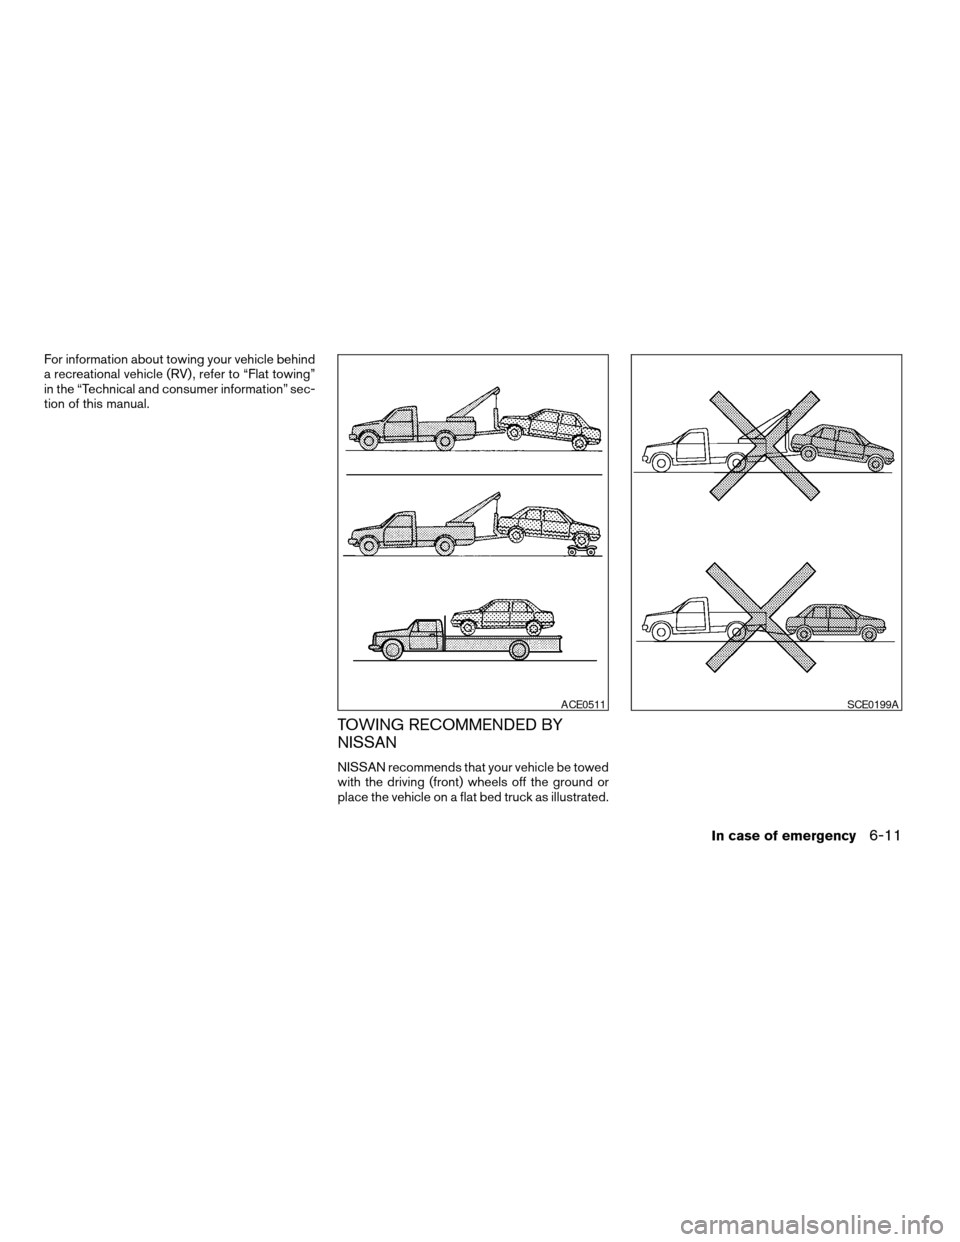 NISSAN ALTIMA COUPE 2009 D32 / 4.G Owners Manual For information about towing your vehicle behind
a recreational vehicle (RV) , refer to “Flat towing”
in the “Technical and consumer information” sec-
tion of this manual.
TOWING RECOMMENDED B